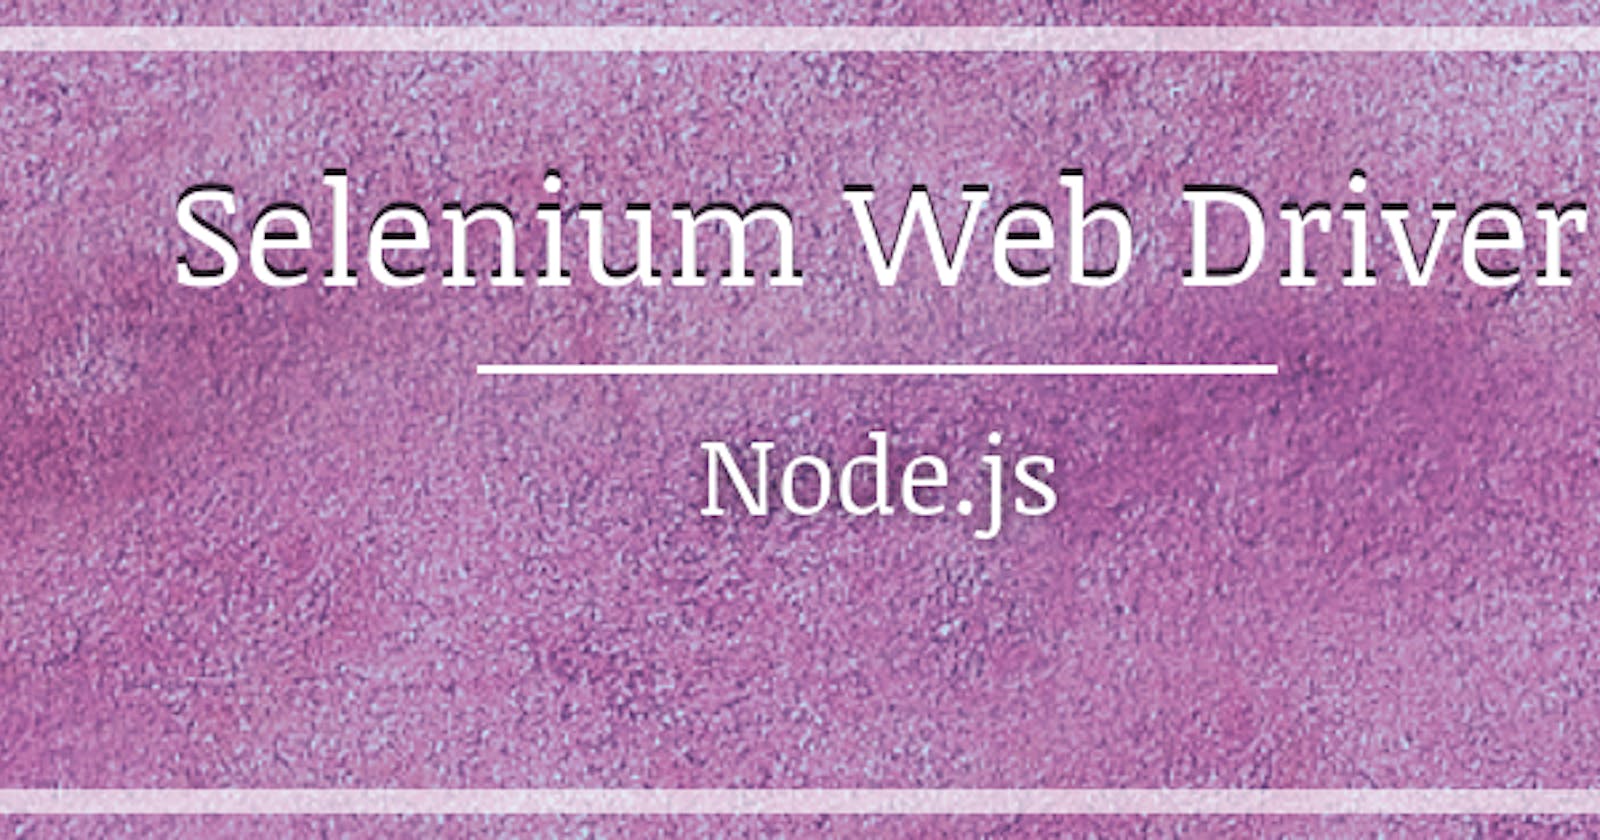 Automated testing with Selenium WebDriver and Node.js